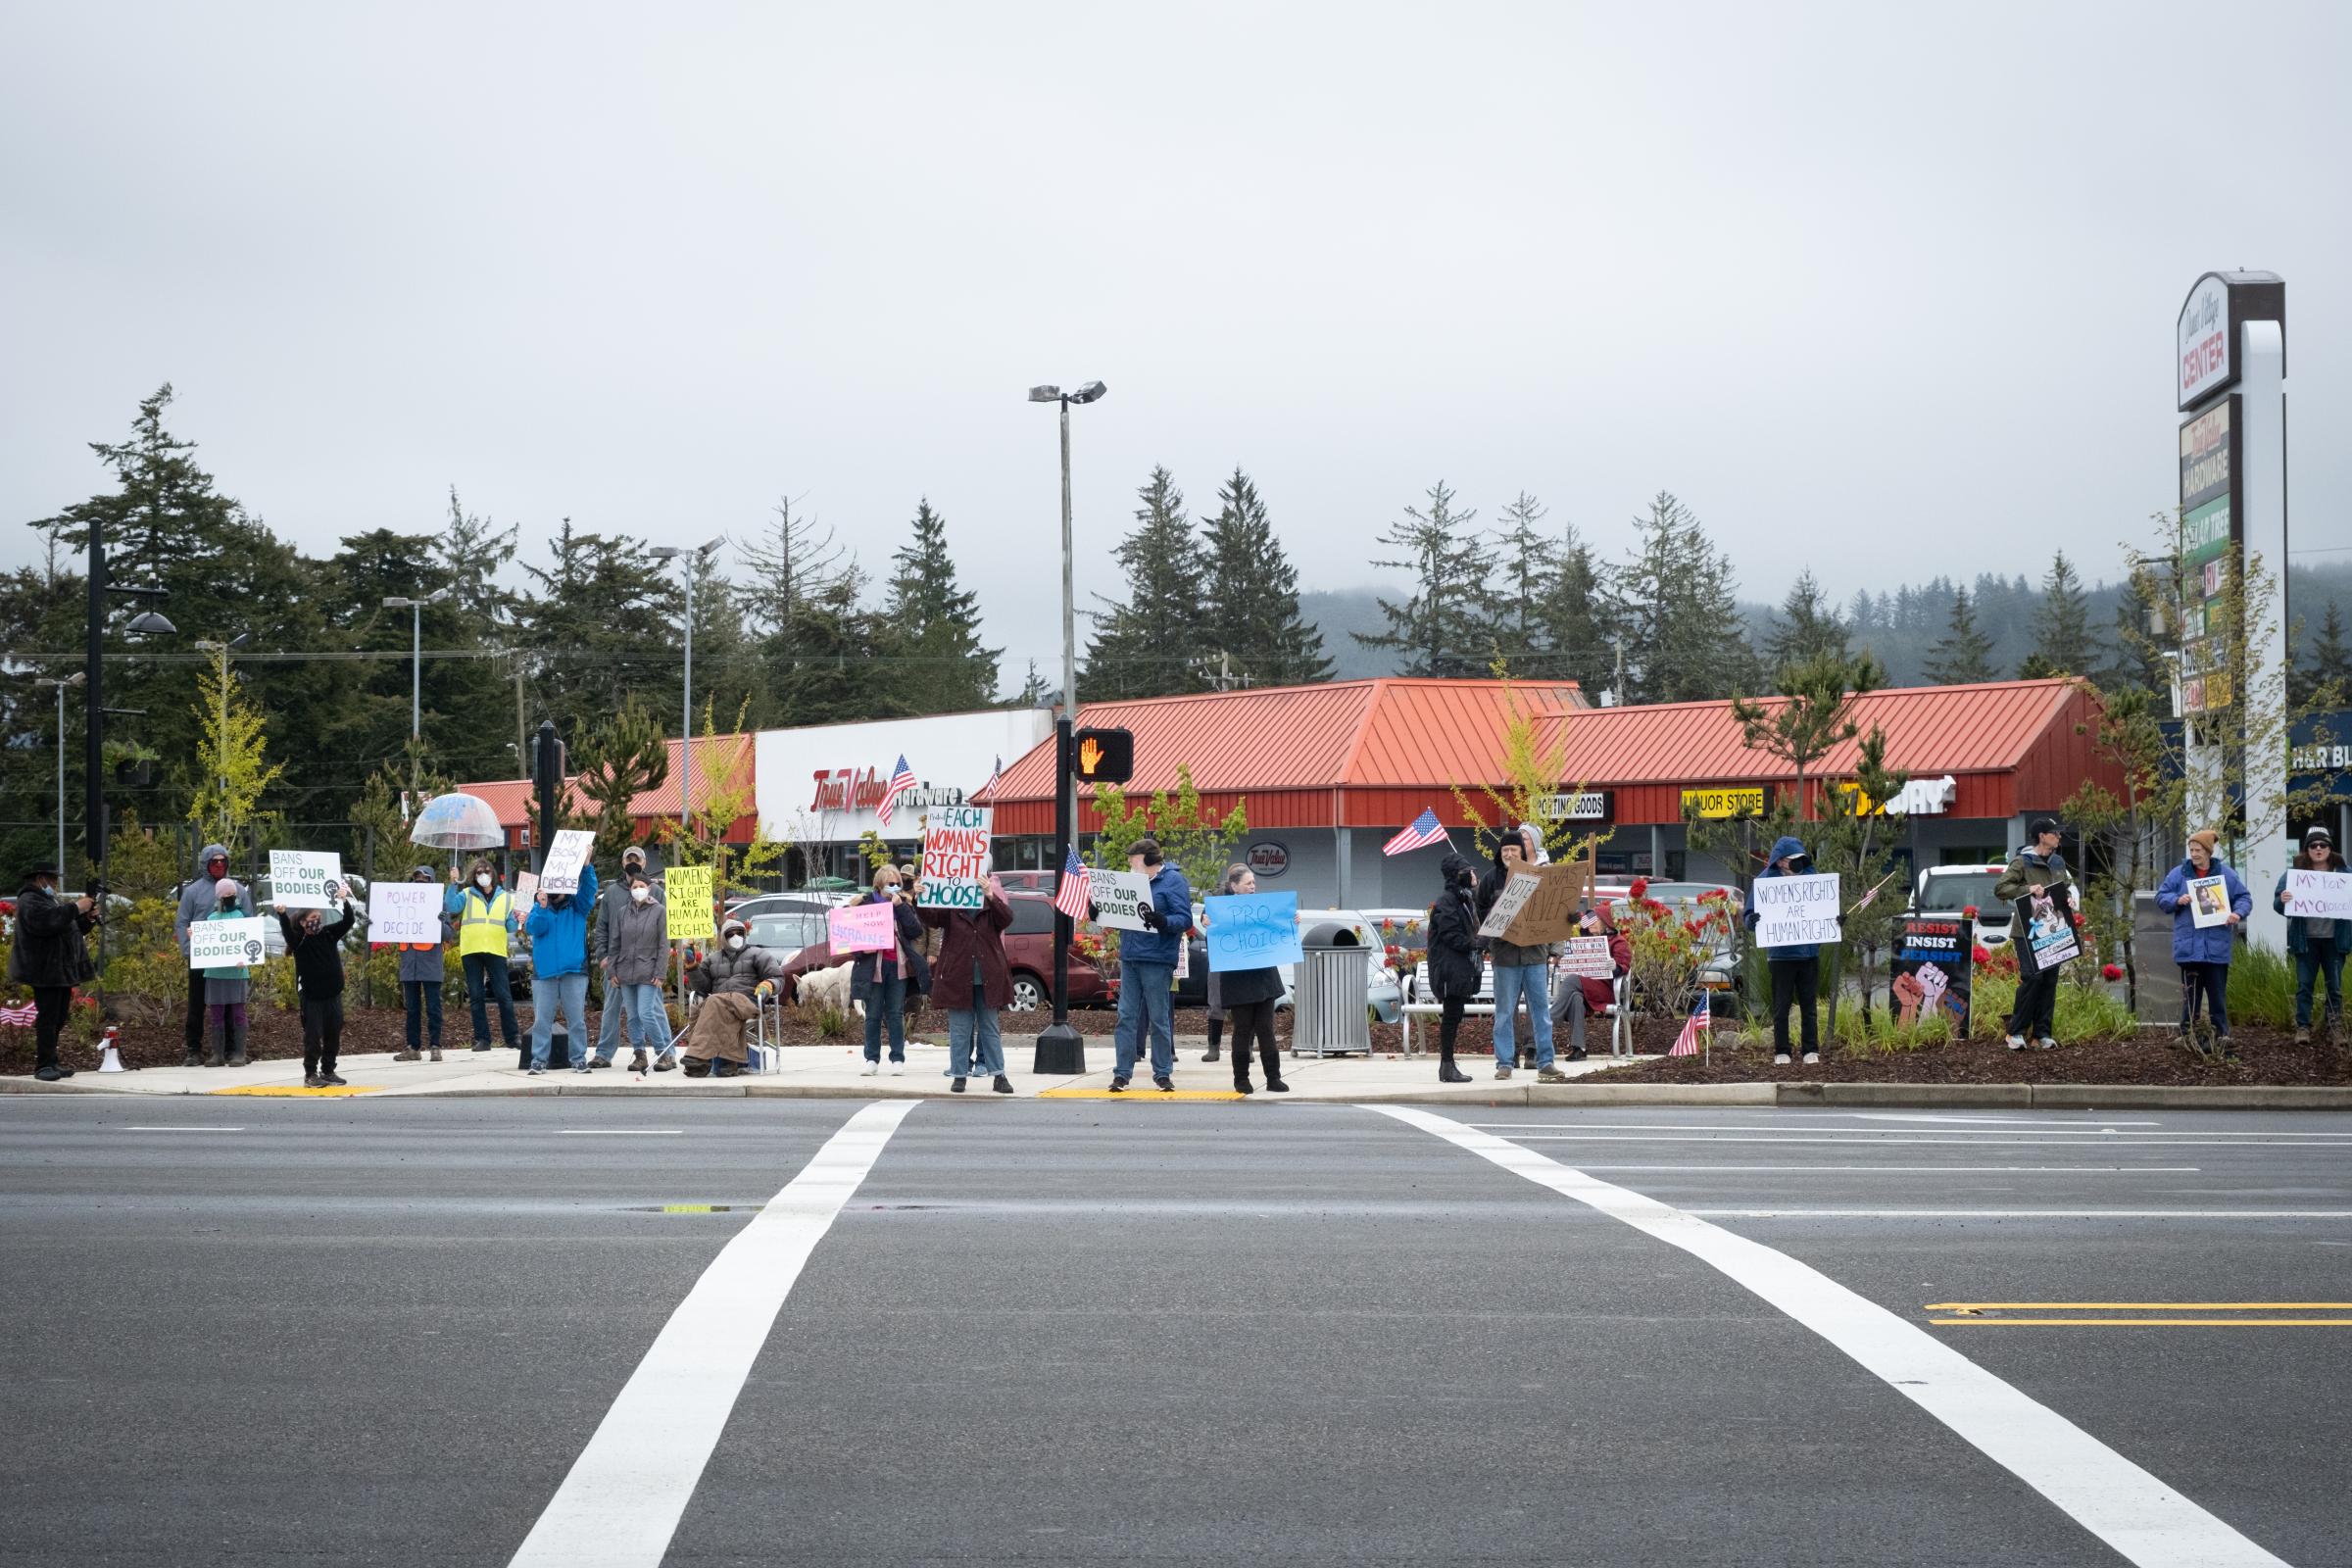 Bans Off Our Bodies Rally Florence Oregon - People gathered at Highways 101 and 126 for Band Off Our Bodies protest, Florence Oregon, May 14,...